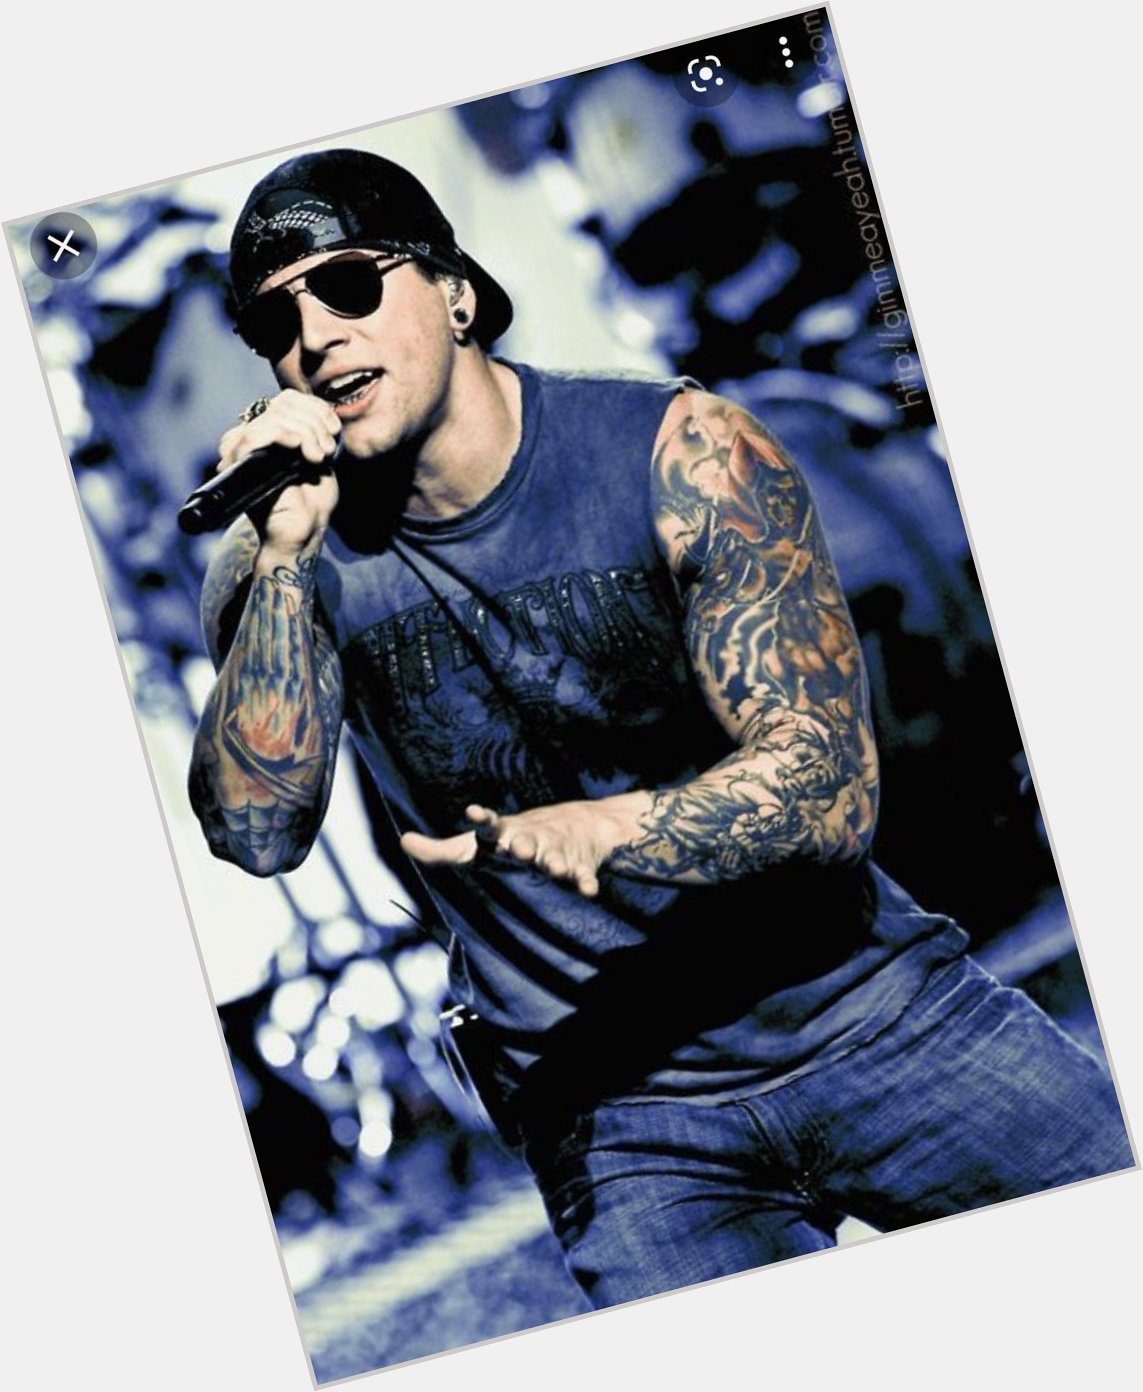 Happy Birthday to M. Shadows!!!  What s your favorite Avenged Sevenfold song? 